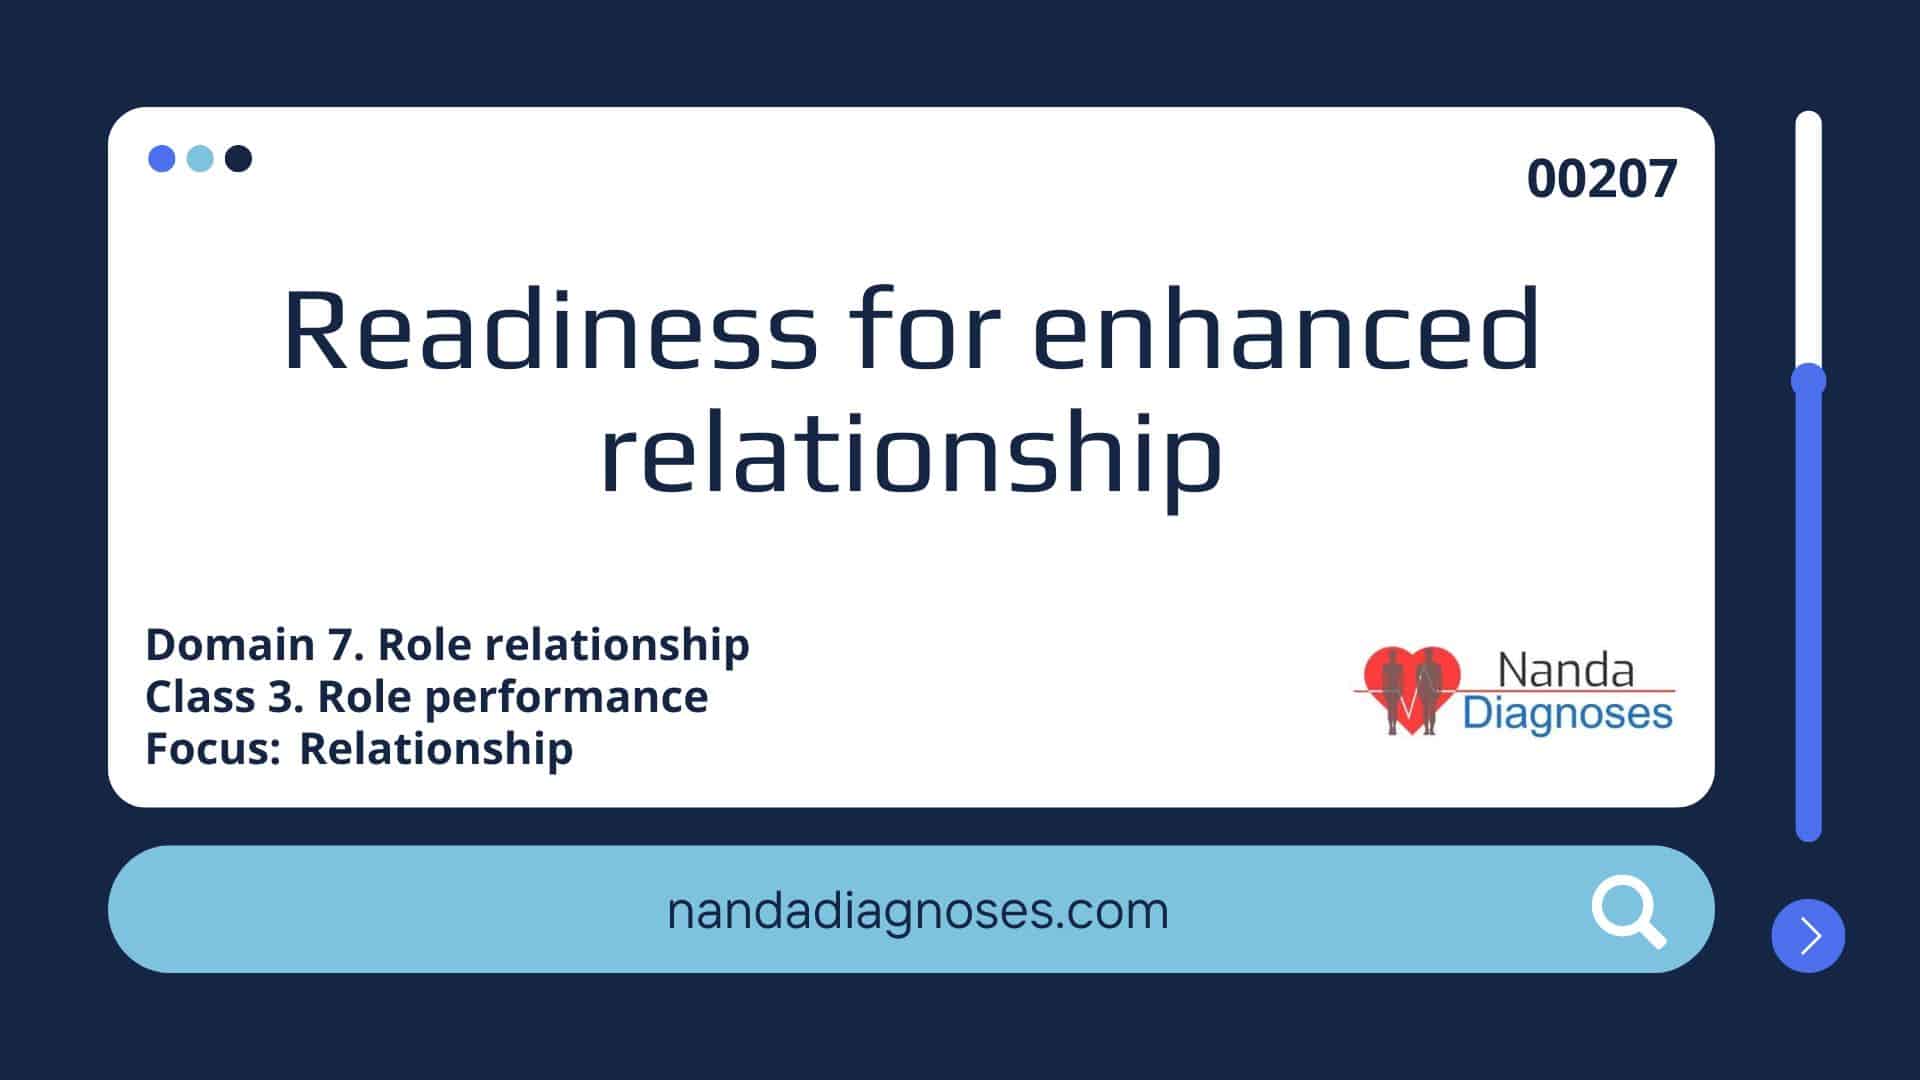 Readiness for enhanced relationship